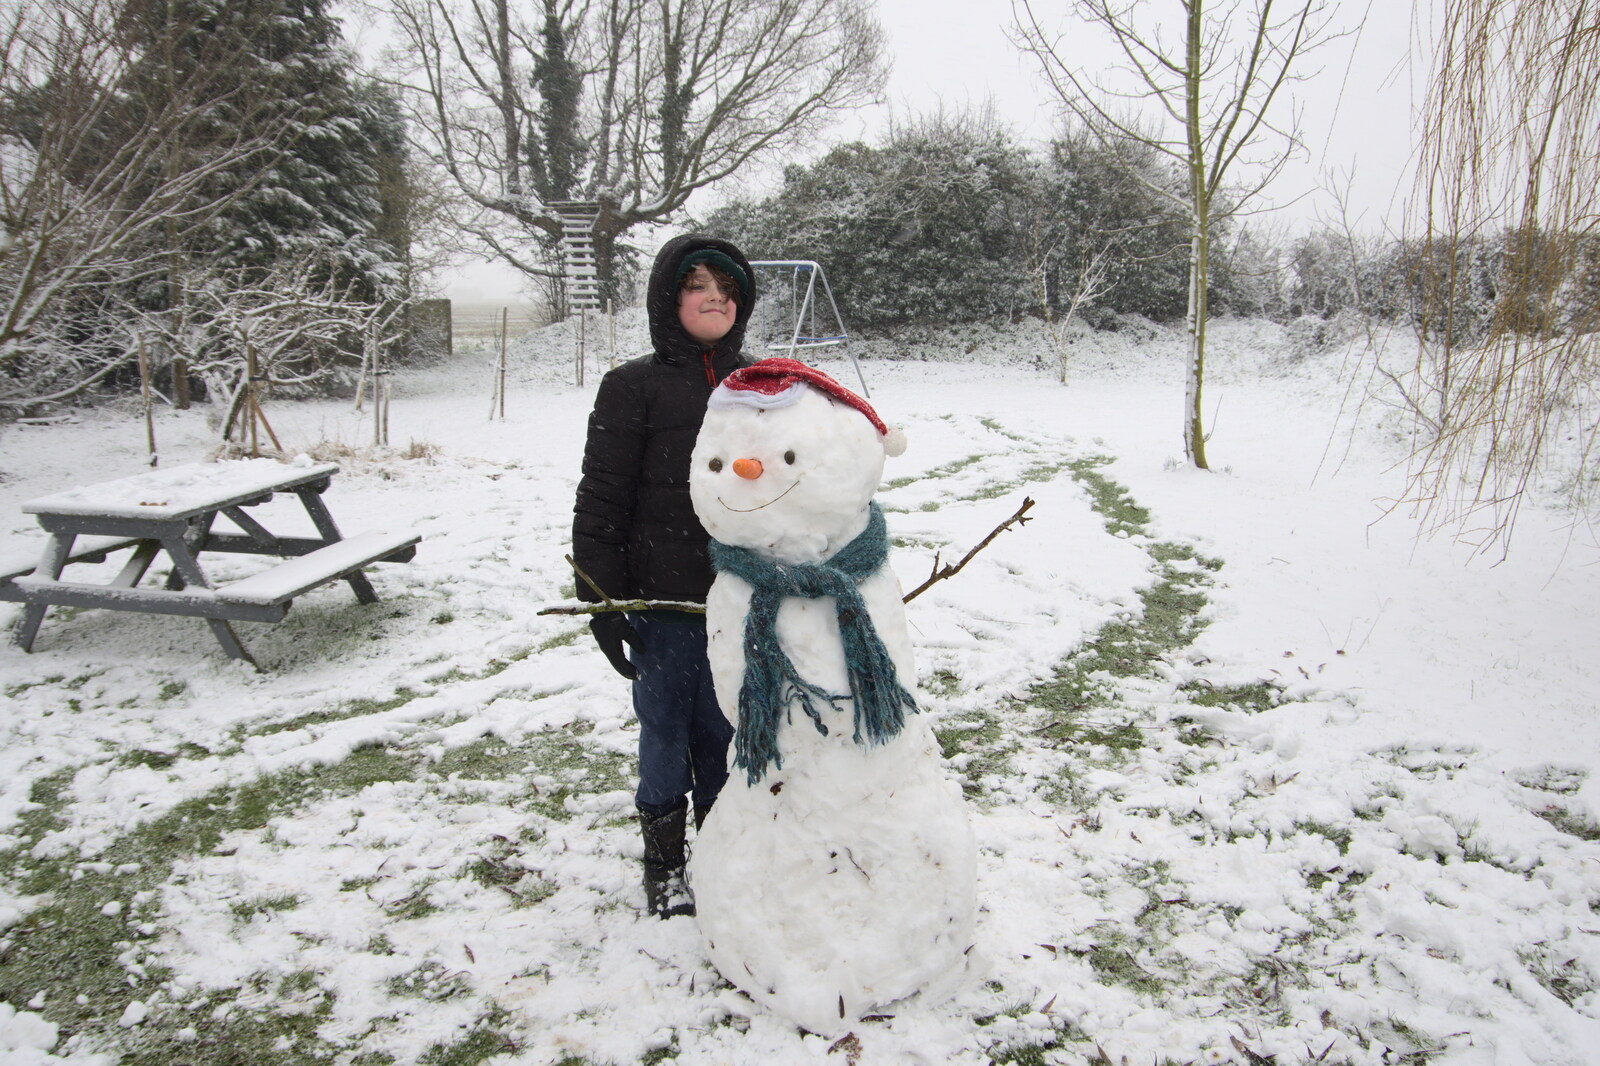 A snowman is made from Beast From The East Two - The Sequel, Brome, Suffolk - 8th February 2021